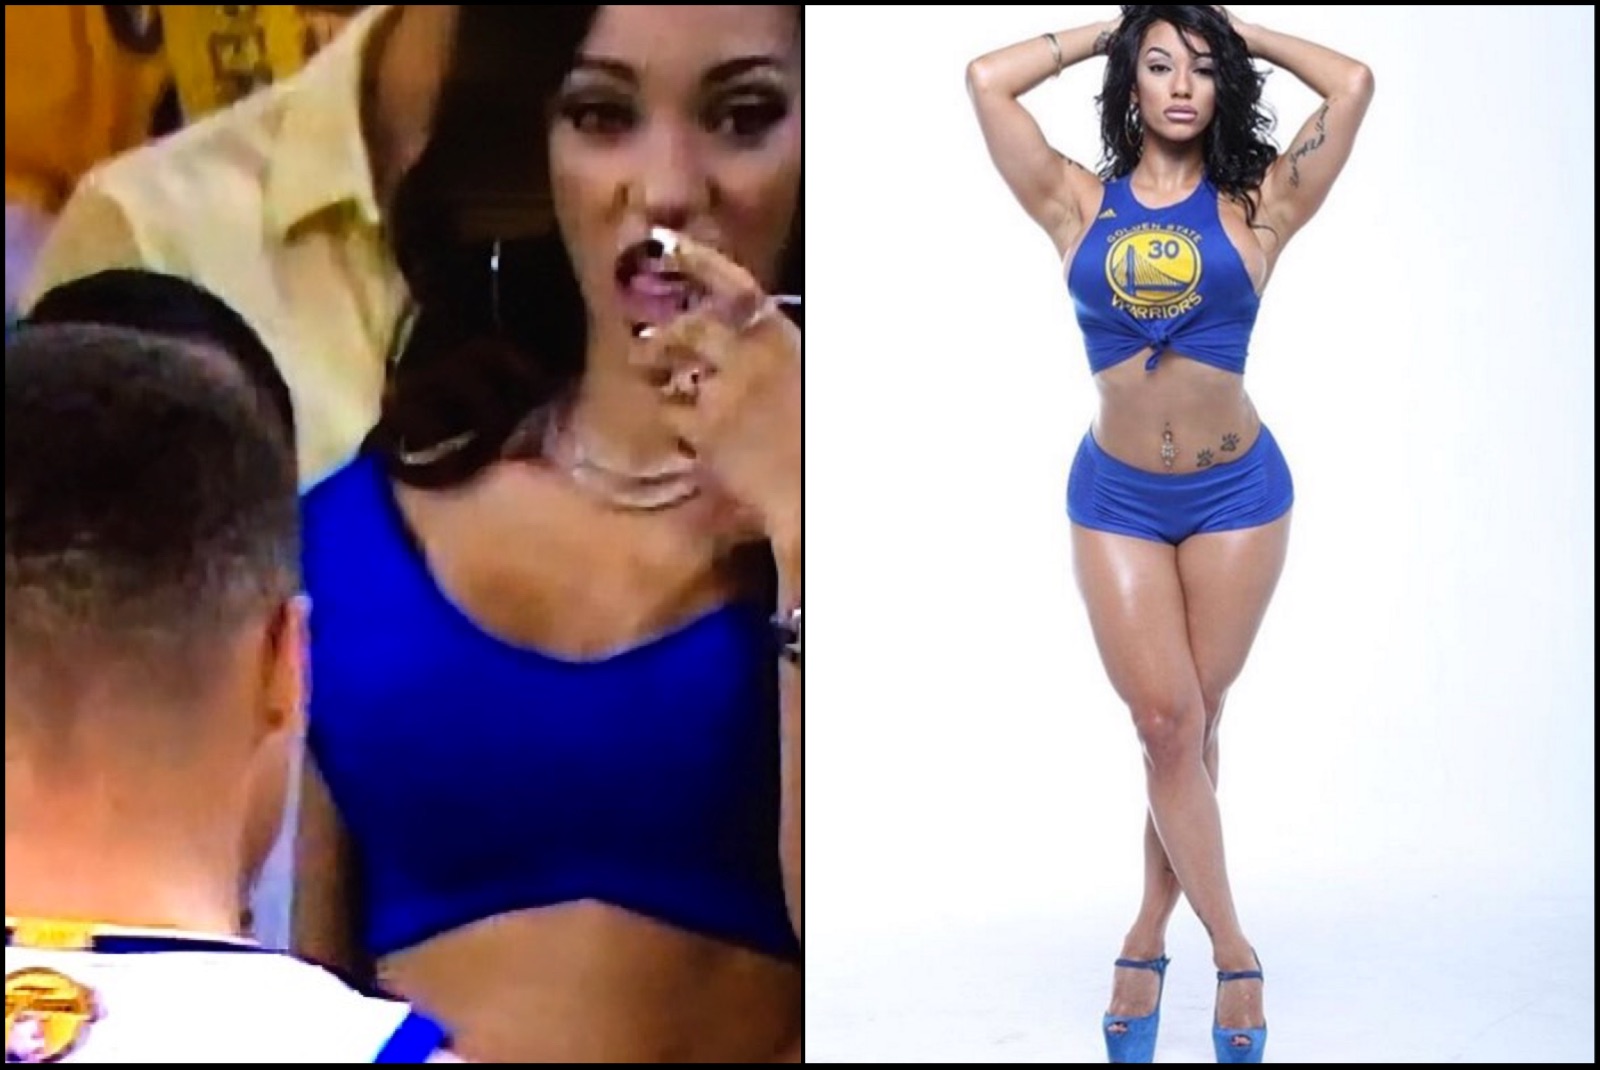 IG Model Checking Out Steph Curry IDed as Roni Rose (Pics-Vids) .